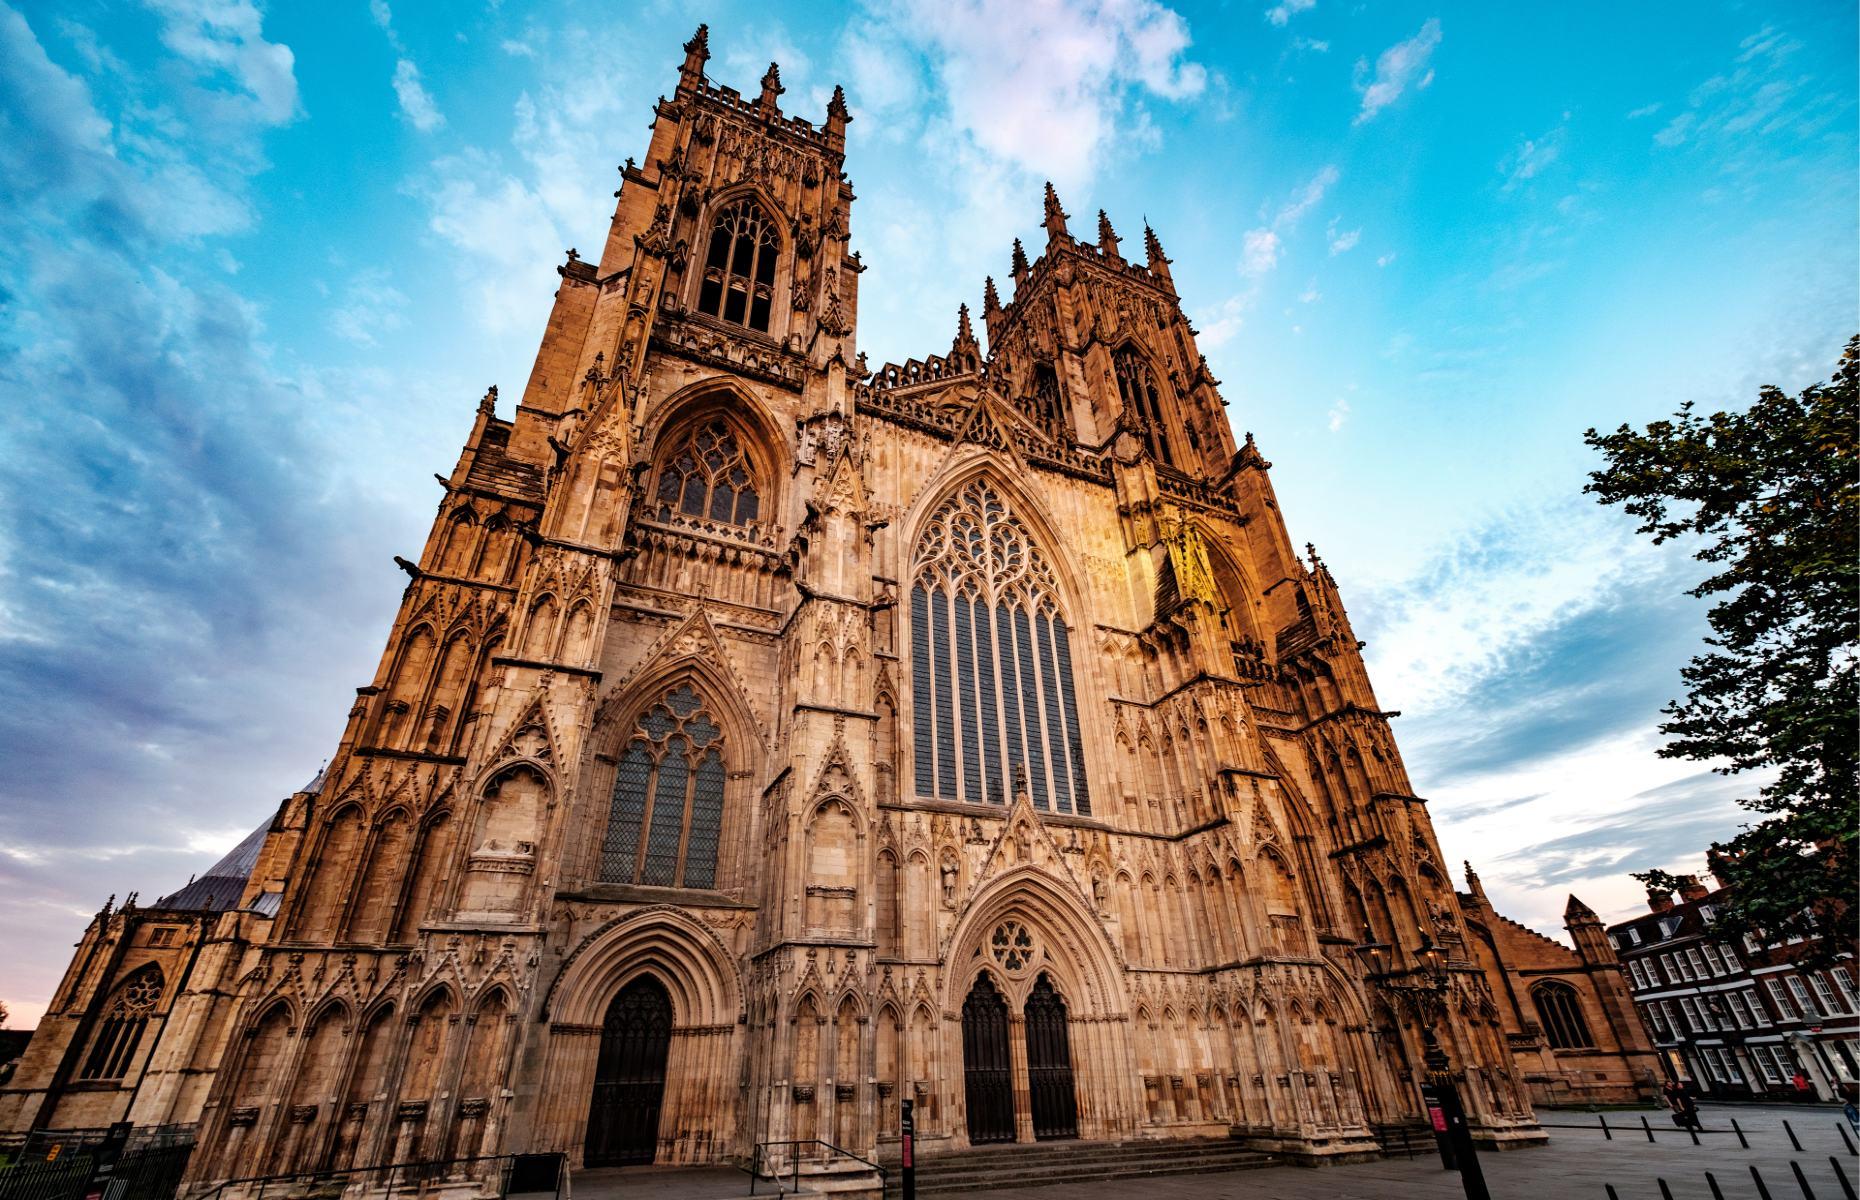 <p>Standing majestically over the historic streets of <a href="http://www.loveexploring.com/guides/86444/explore-york-with-kids-the-top-things-to-do-where-to-stay-and-what-to-eat">York</a>, this Gothic structure is one of the most impressive cathedrals in England. Known as the largest medieval cathedral in northern Europe, York Minster is famed for its stunning windows, particularly its grand 15th-century Great East Window, which is the largest example of medieval stained glass in the world. Looming over York, its mighty tower boasts spectacular views across the northeast. </p>